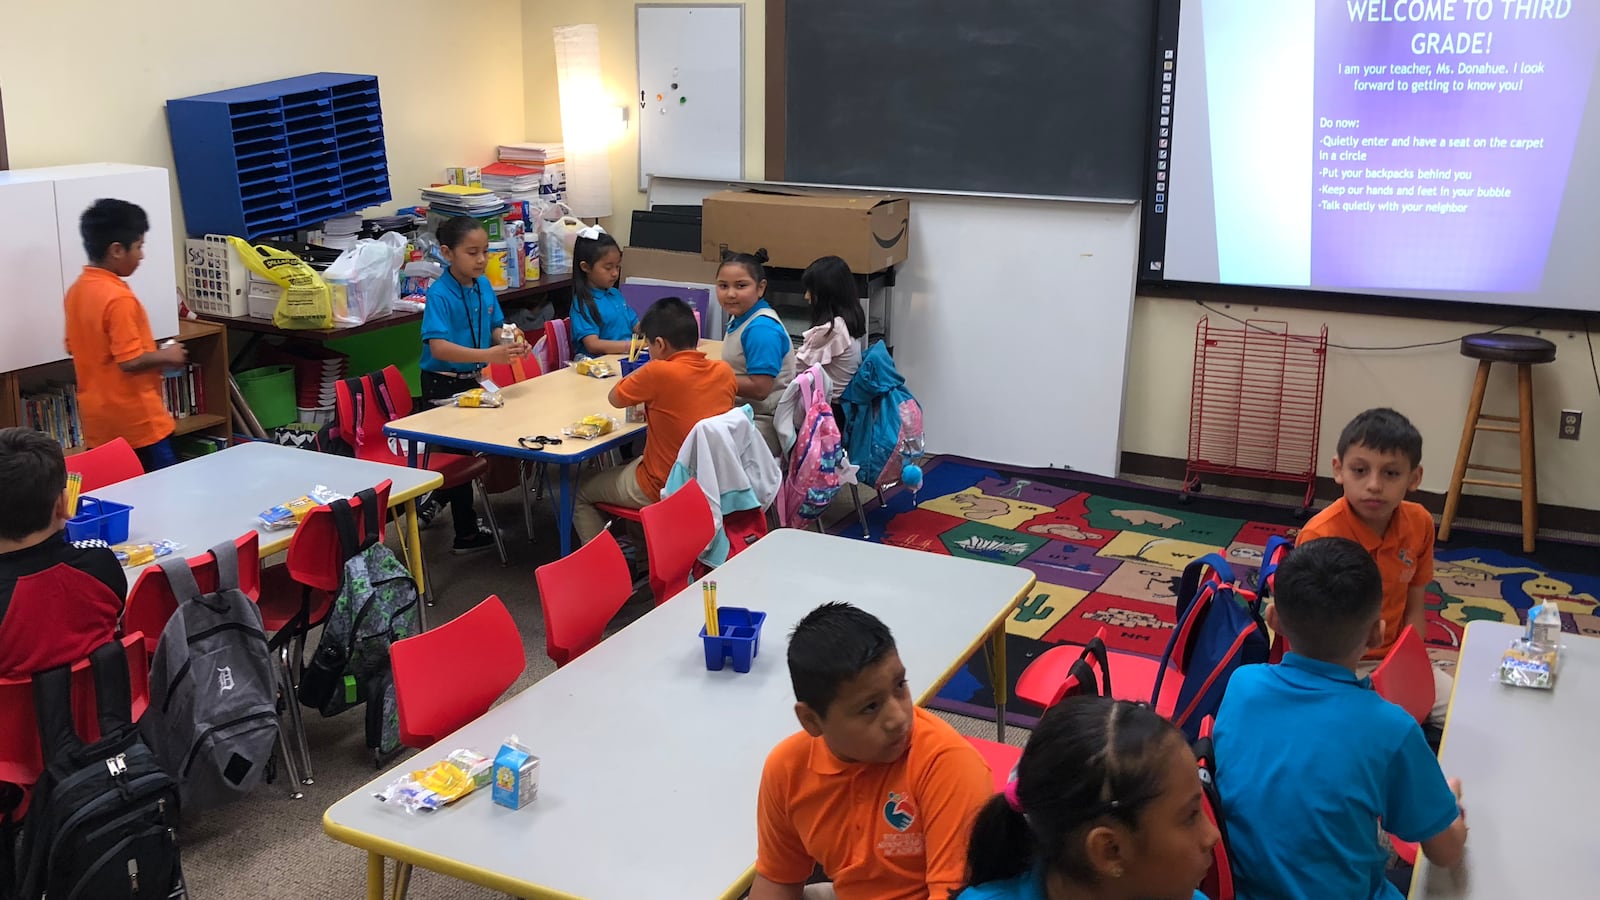 Third-graders at Escuela Avancemos, a charter school in Detroit, on the first day of the 2019-2020 school year.